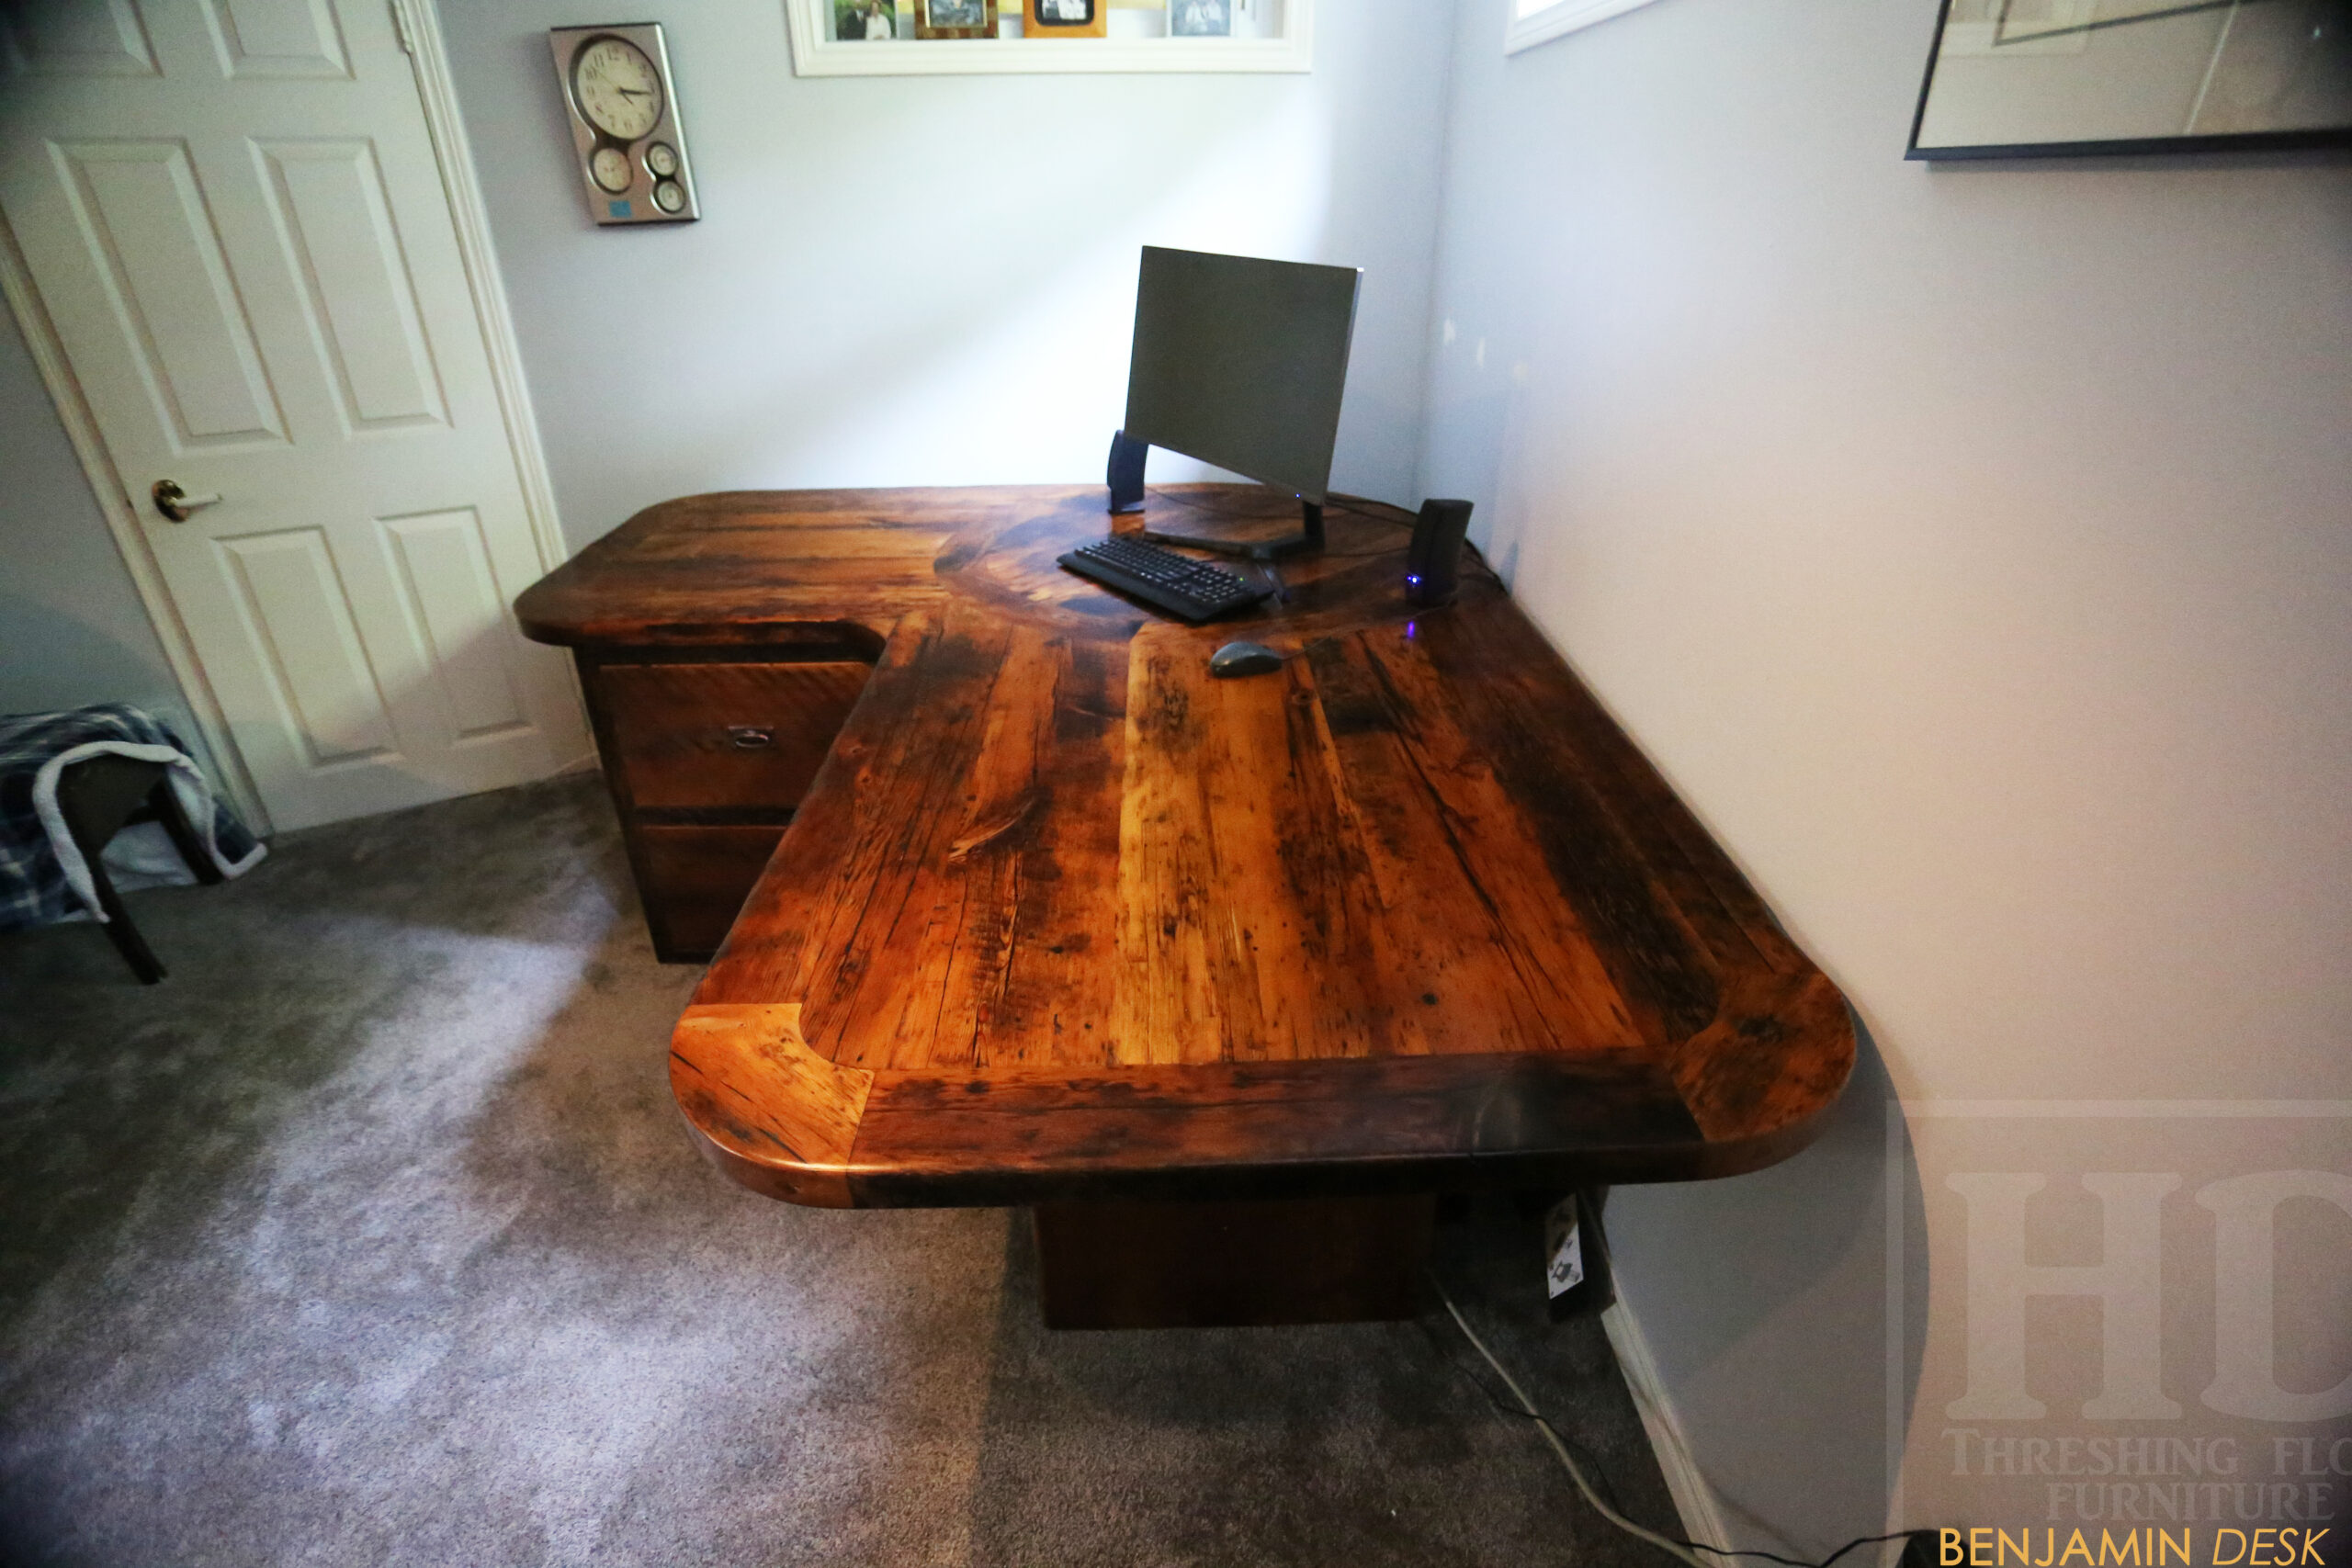 Ontario Barnwood L Shaped Desk we made for a Waterloo, Ontario home office - Reclaimed Hemlock Threshing Floor & Grainery Board Construction â€“ 2 Drawers / Mission Cast Brass Lee Valley Hardware â€“ Plank Post - Original edges & distressing maintained â€“ Premium epoxy + satin polyurethane finish - www.table.ca